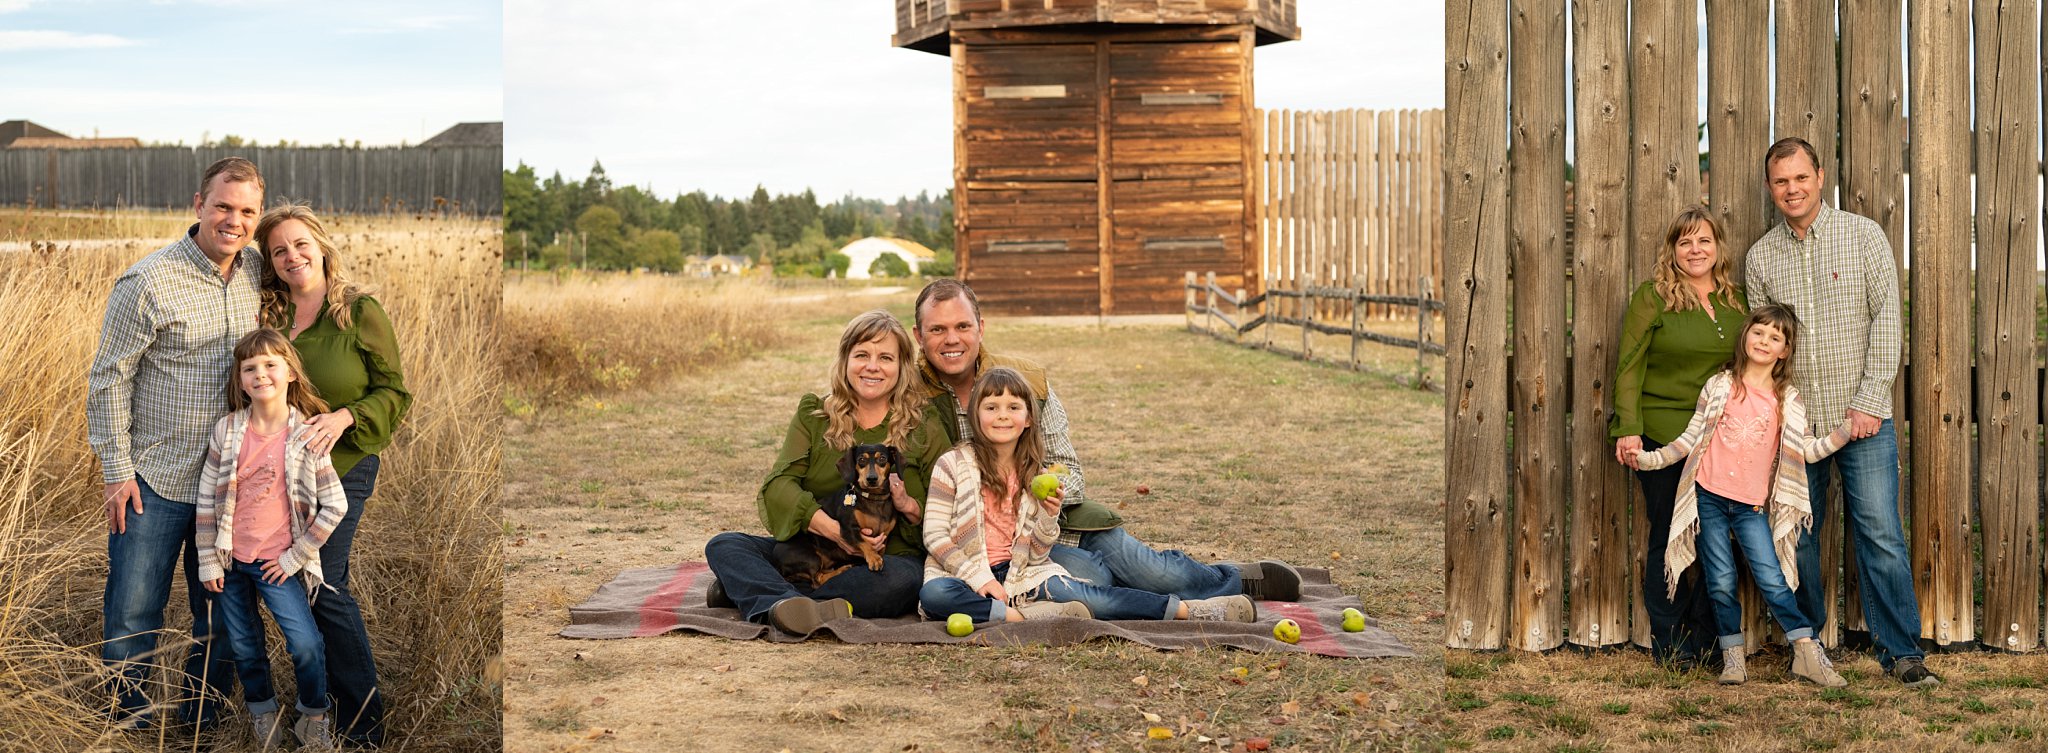 Fall family session